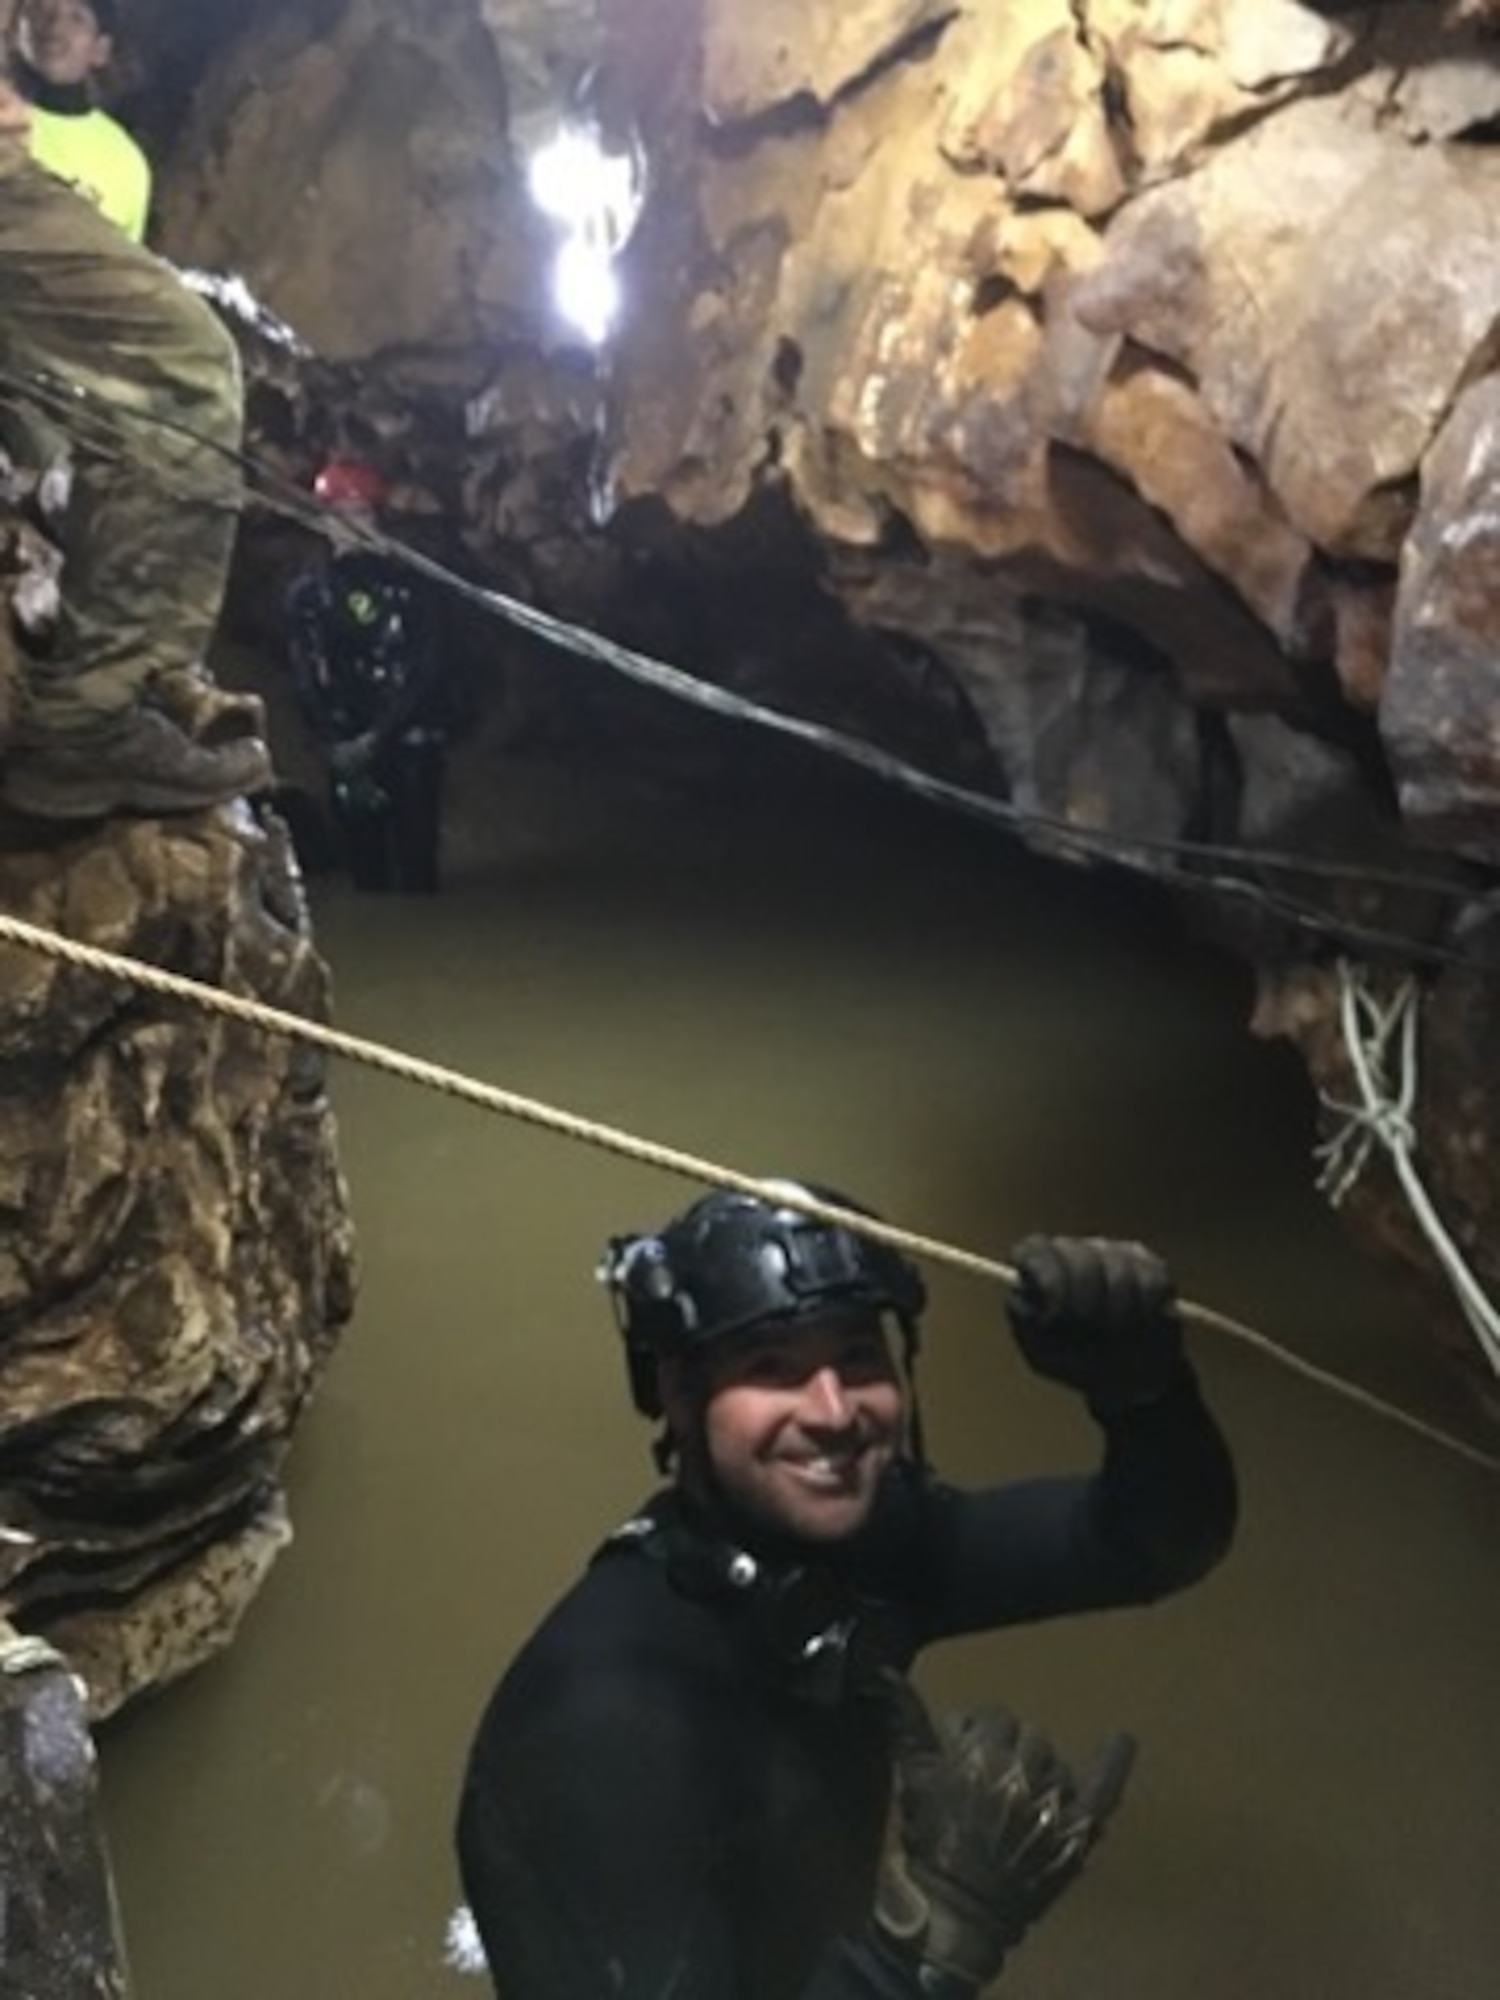 Courtesy photo from U.S. Air Force pararescueman, Tech Sgt Jamie Brisbin of the 106th Rescue Wing's 103rd Rescue Squadron who took part as a diver in the 2018 Thai Cave rescue pictured.